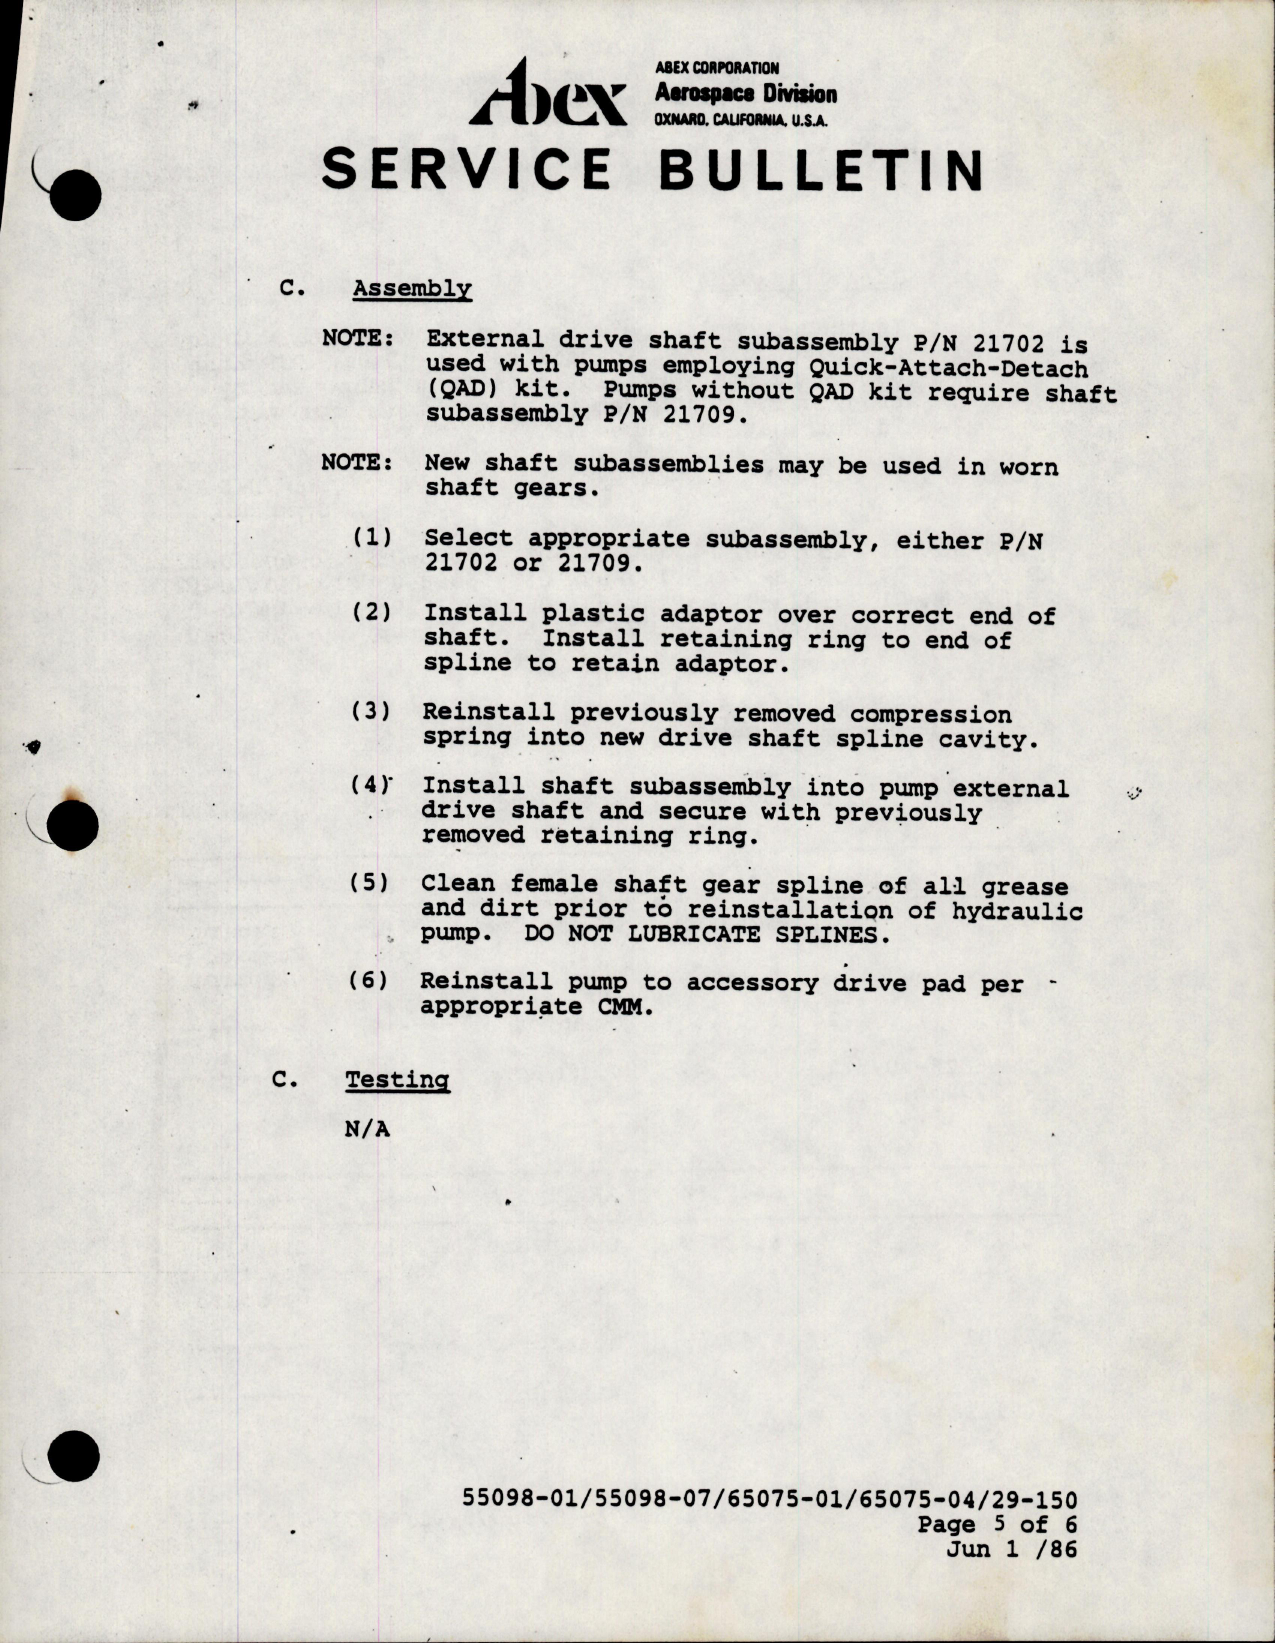 Sample page 5 from AirCorps Library document: Hydraulic Power - Engine Driven Pump - Installation of New Shaft S/A with Non-Metallic Adaptor - Model AP10V Series